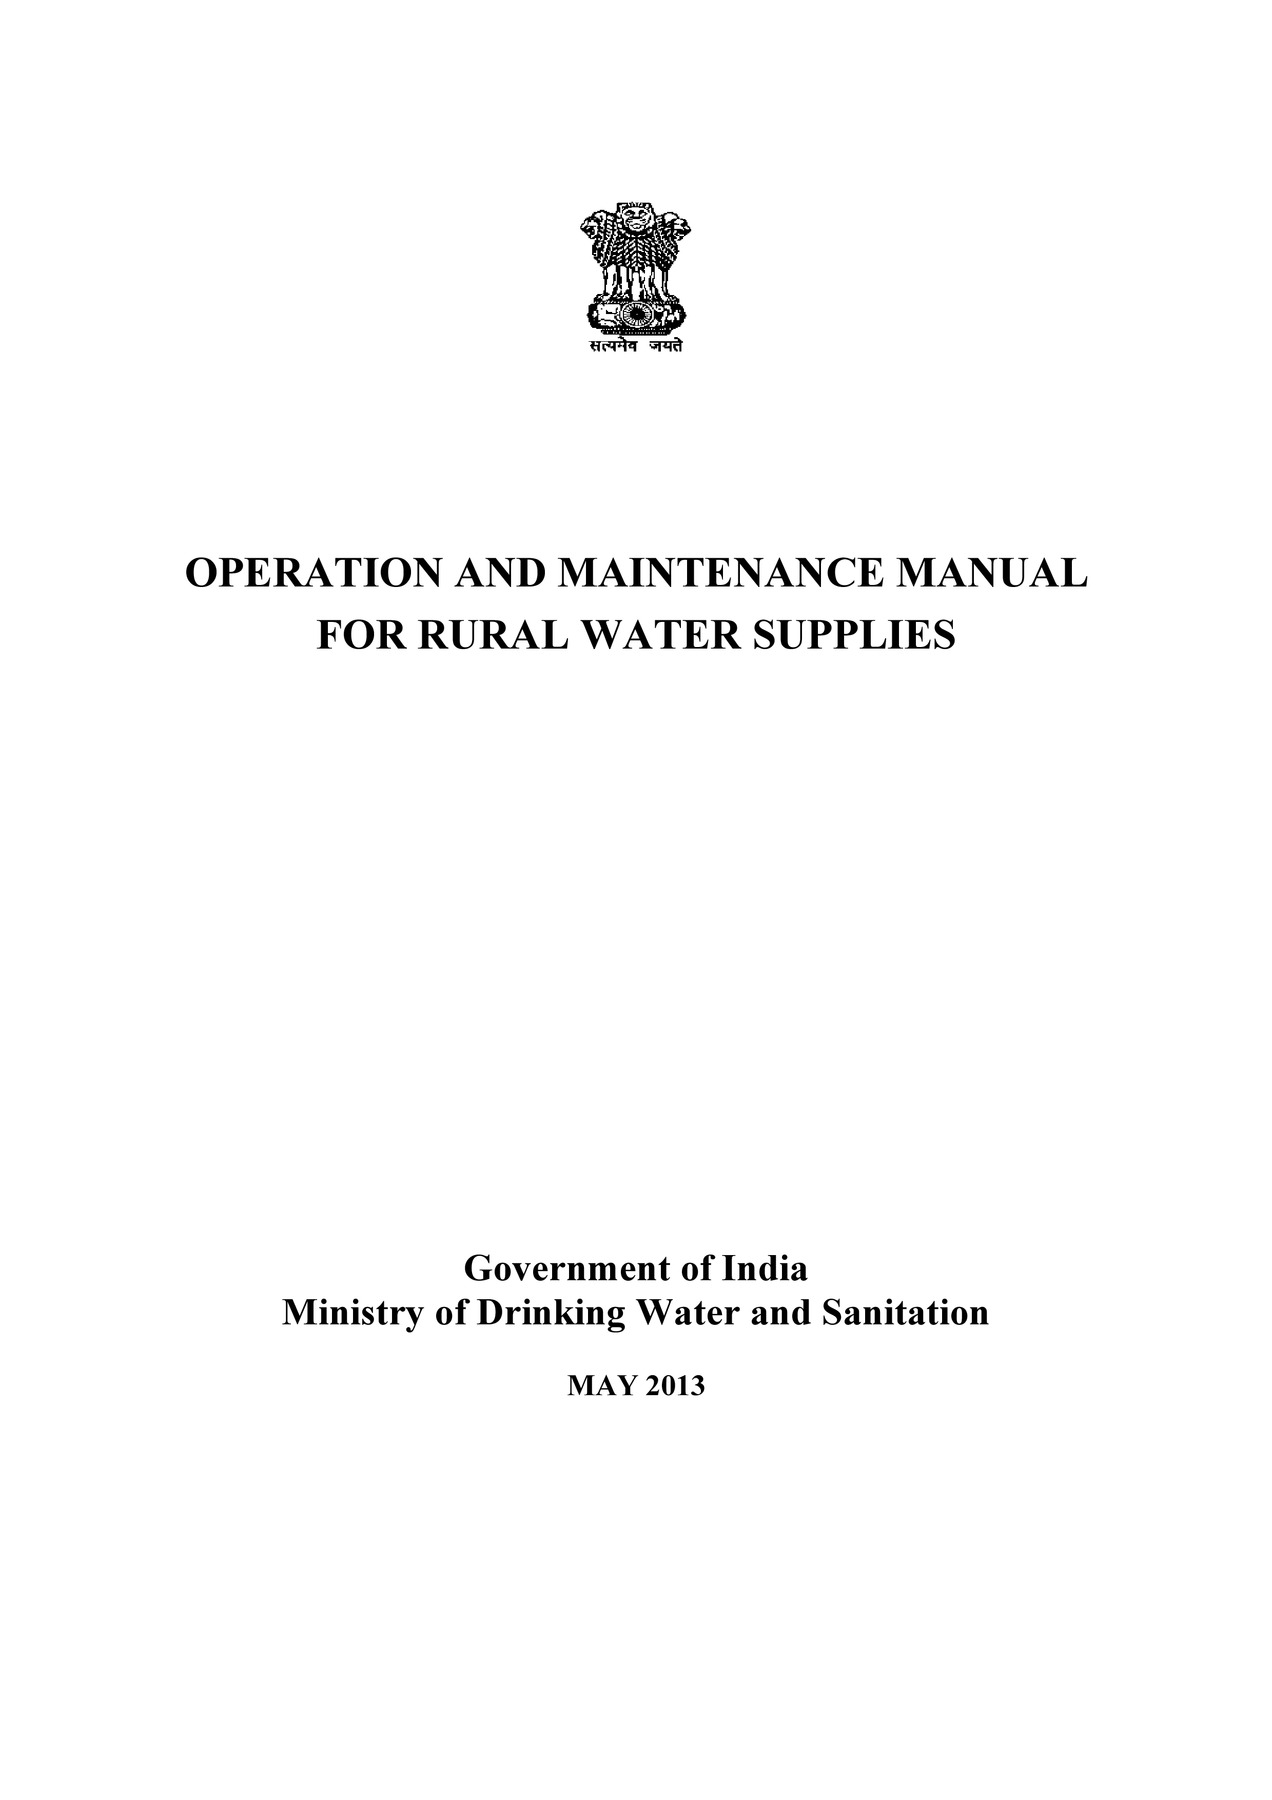 OHSR Tank Scheme 2023 | Operation and Maintenance Manual for Rural Water Supply Systems PDF